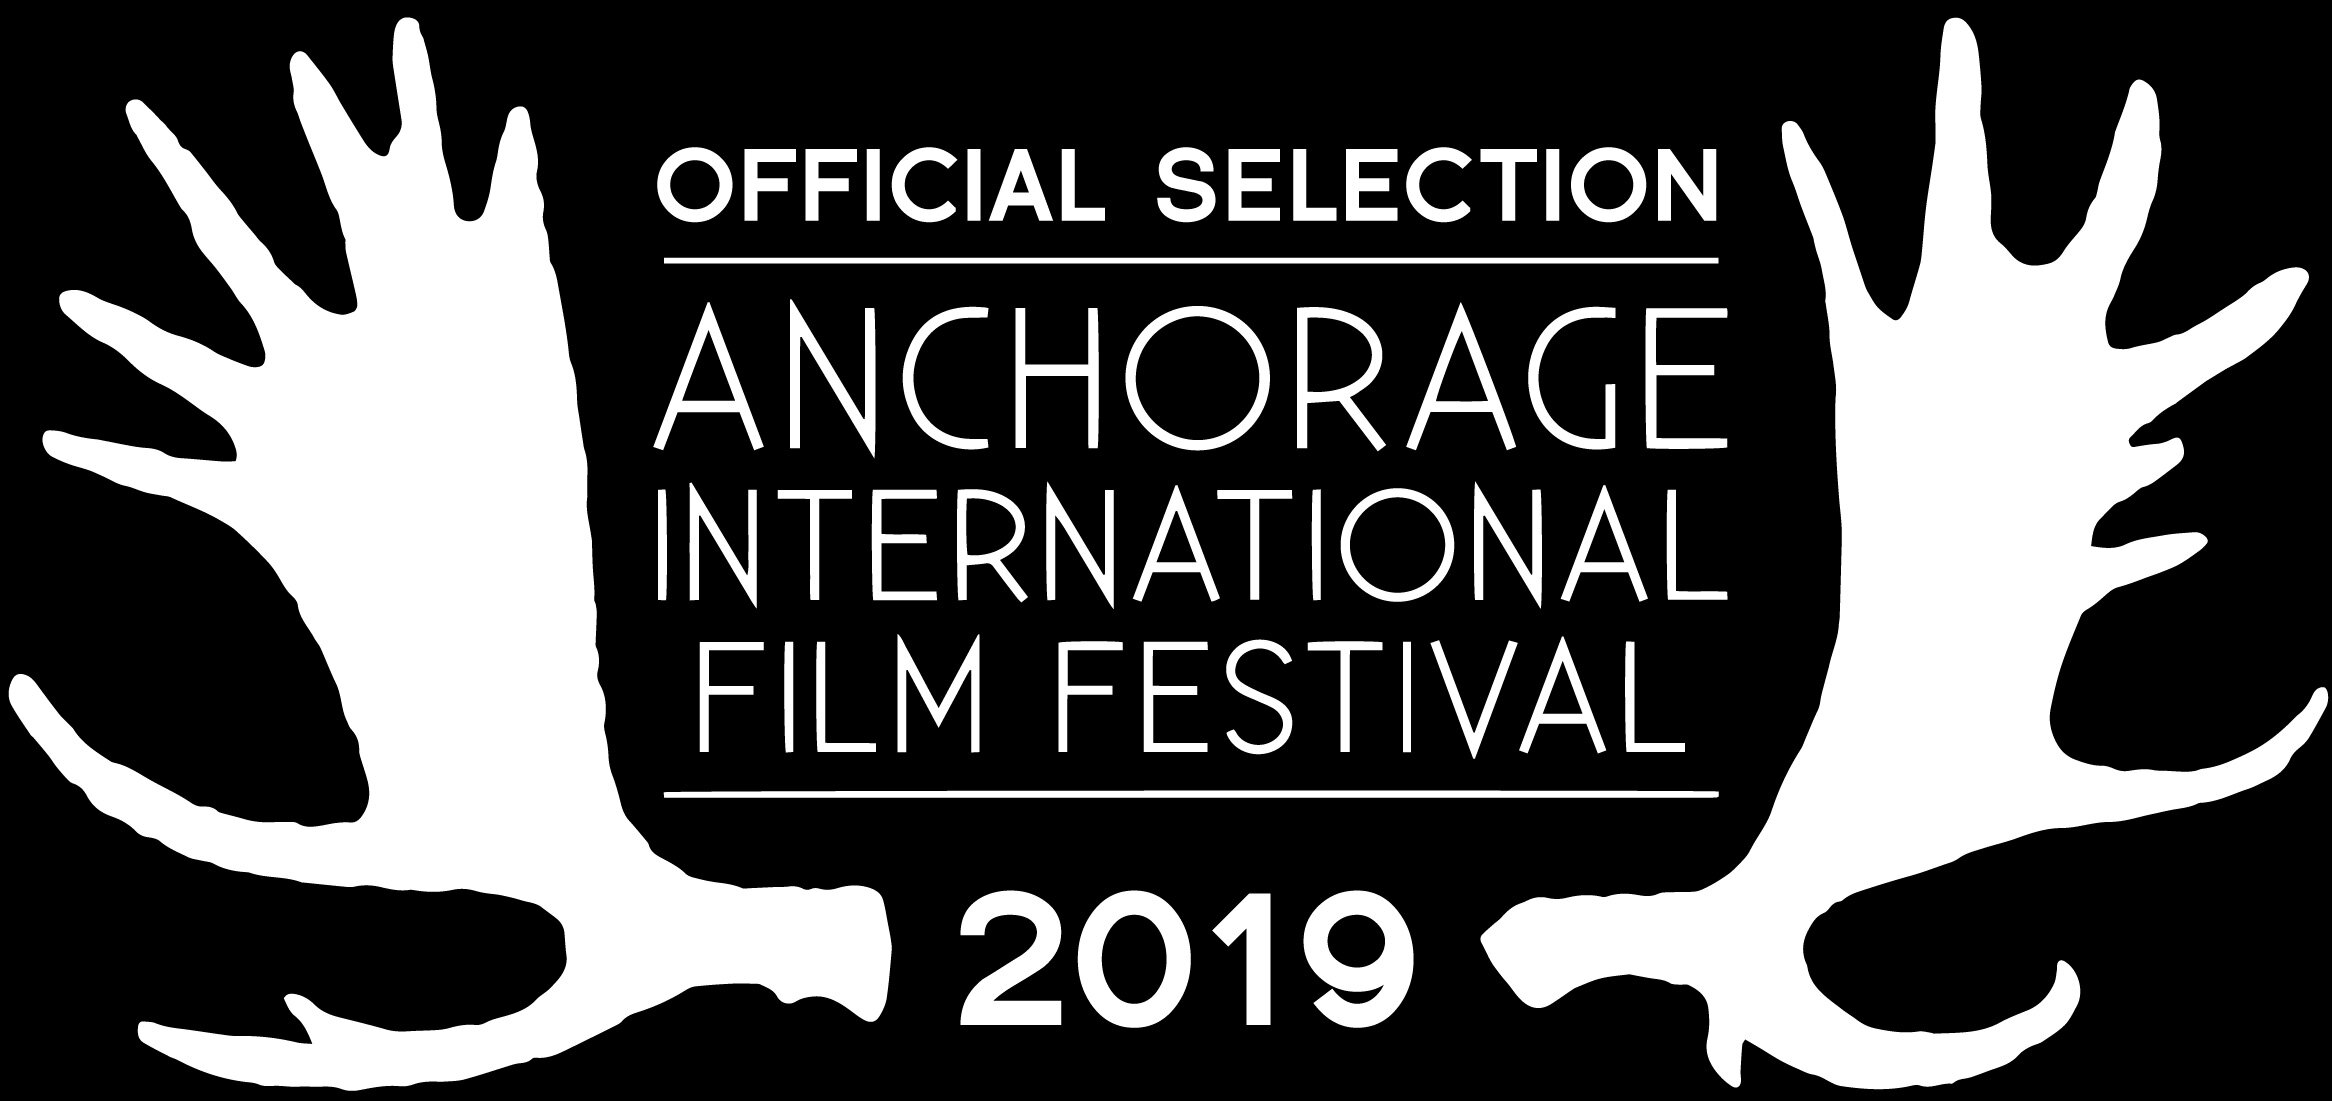 AIFF 2019 Official Selection Laurel_white on black.jpg